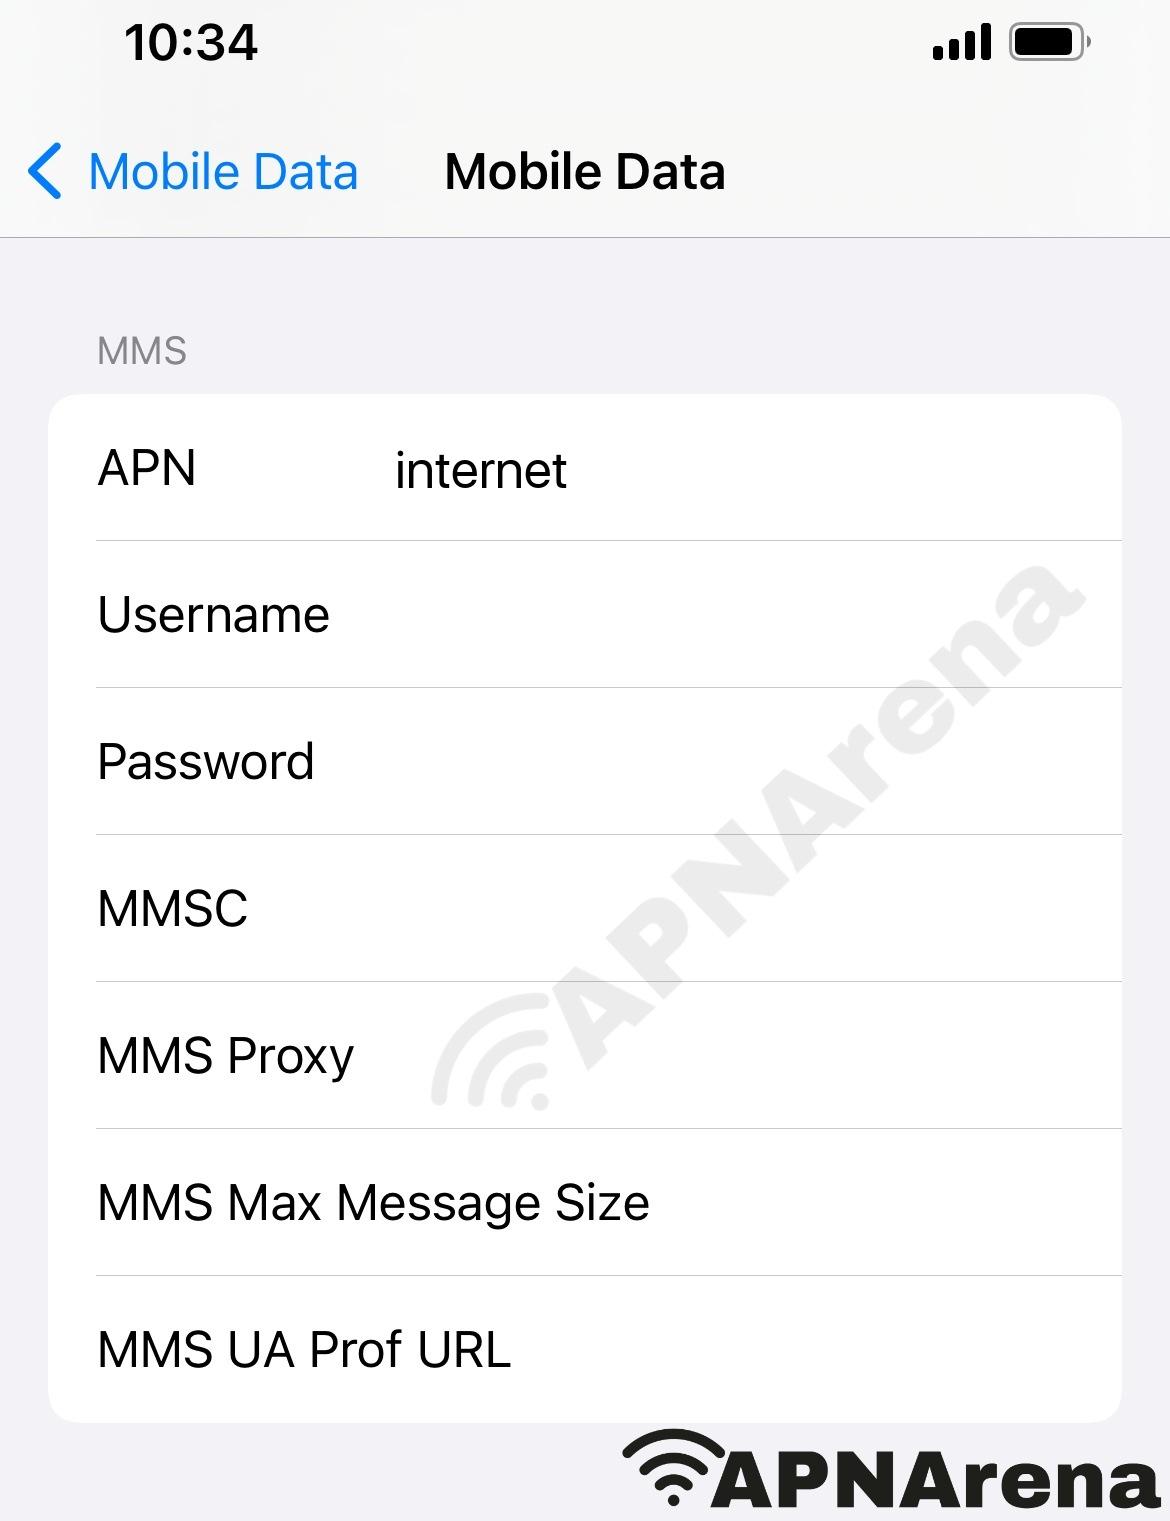 GIV Mobile MMS Settings for iPhone